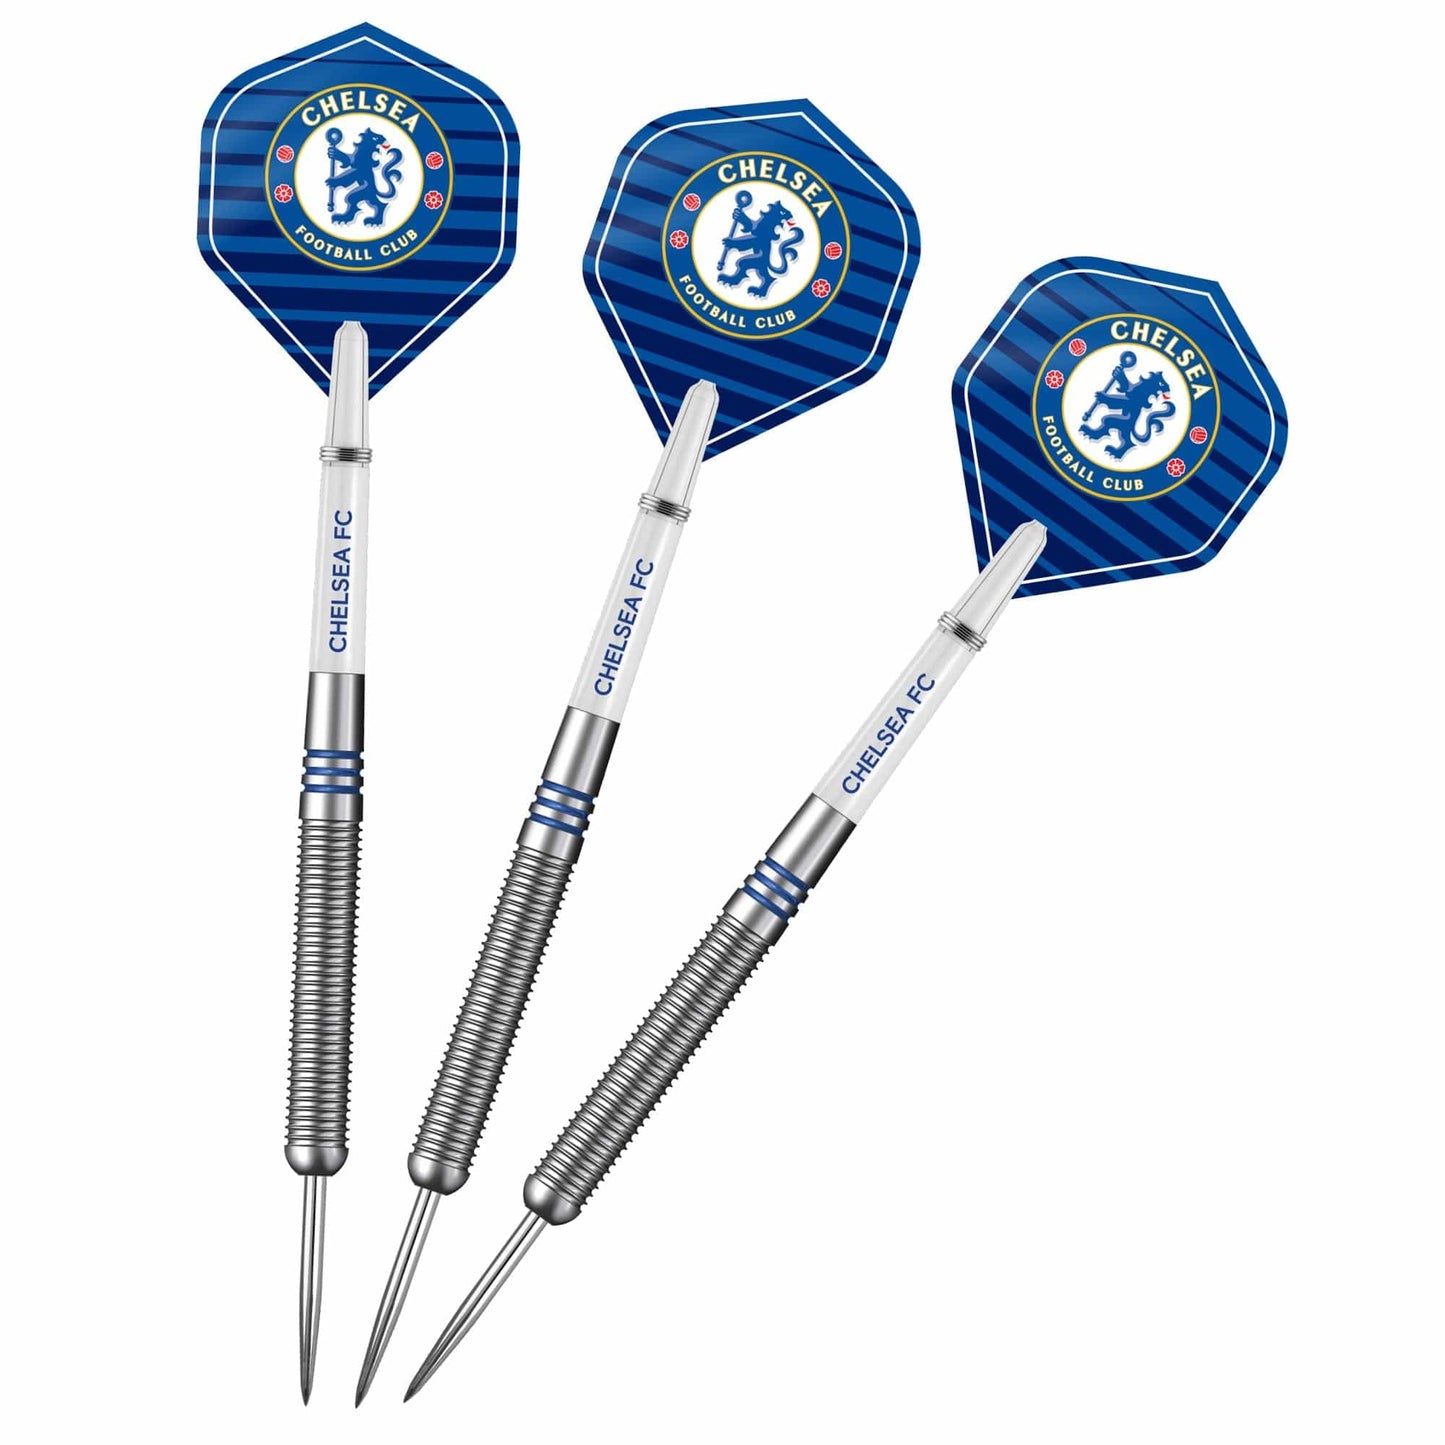 Chelsea Football Darts - Steel Tip Tungsten - Official Licensed - Chelsea FC - 24g